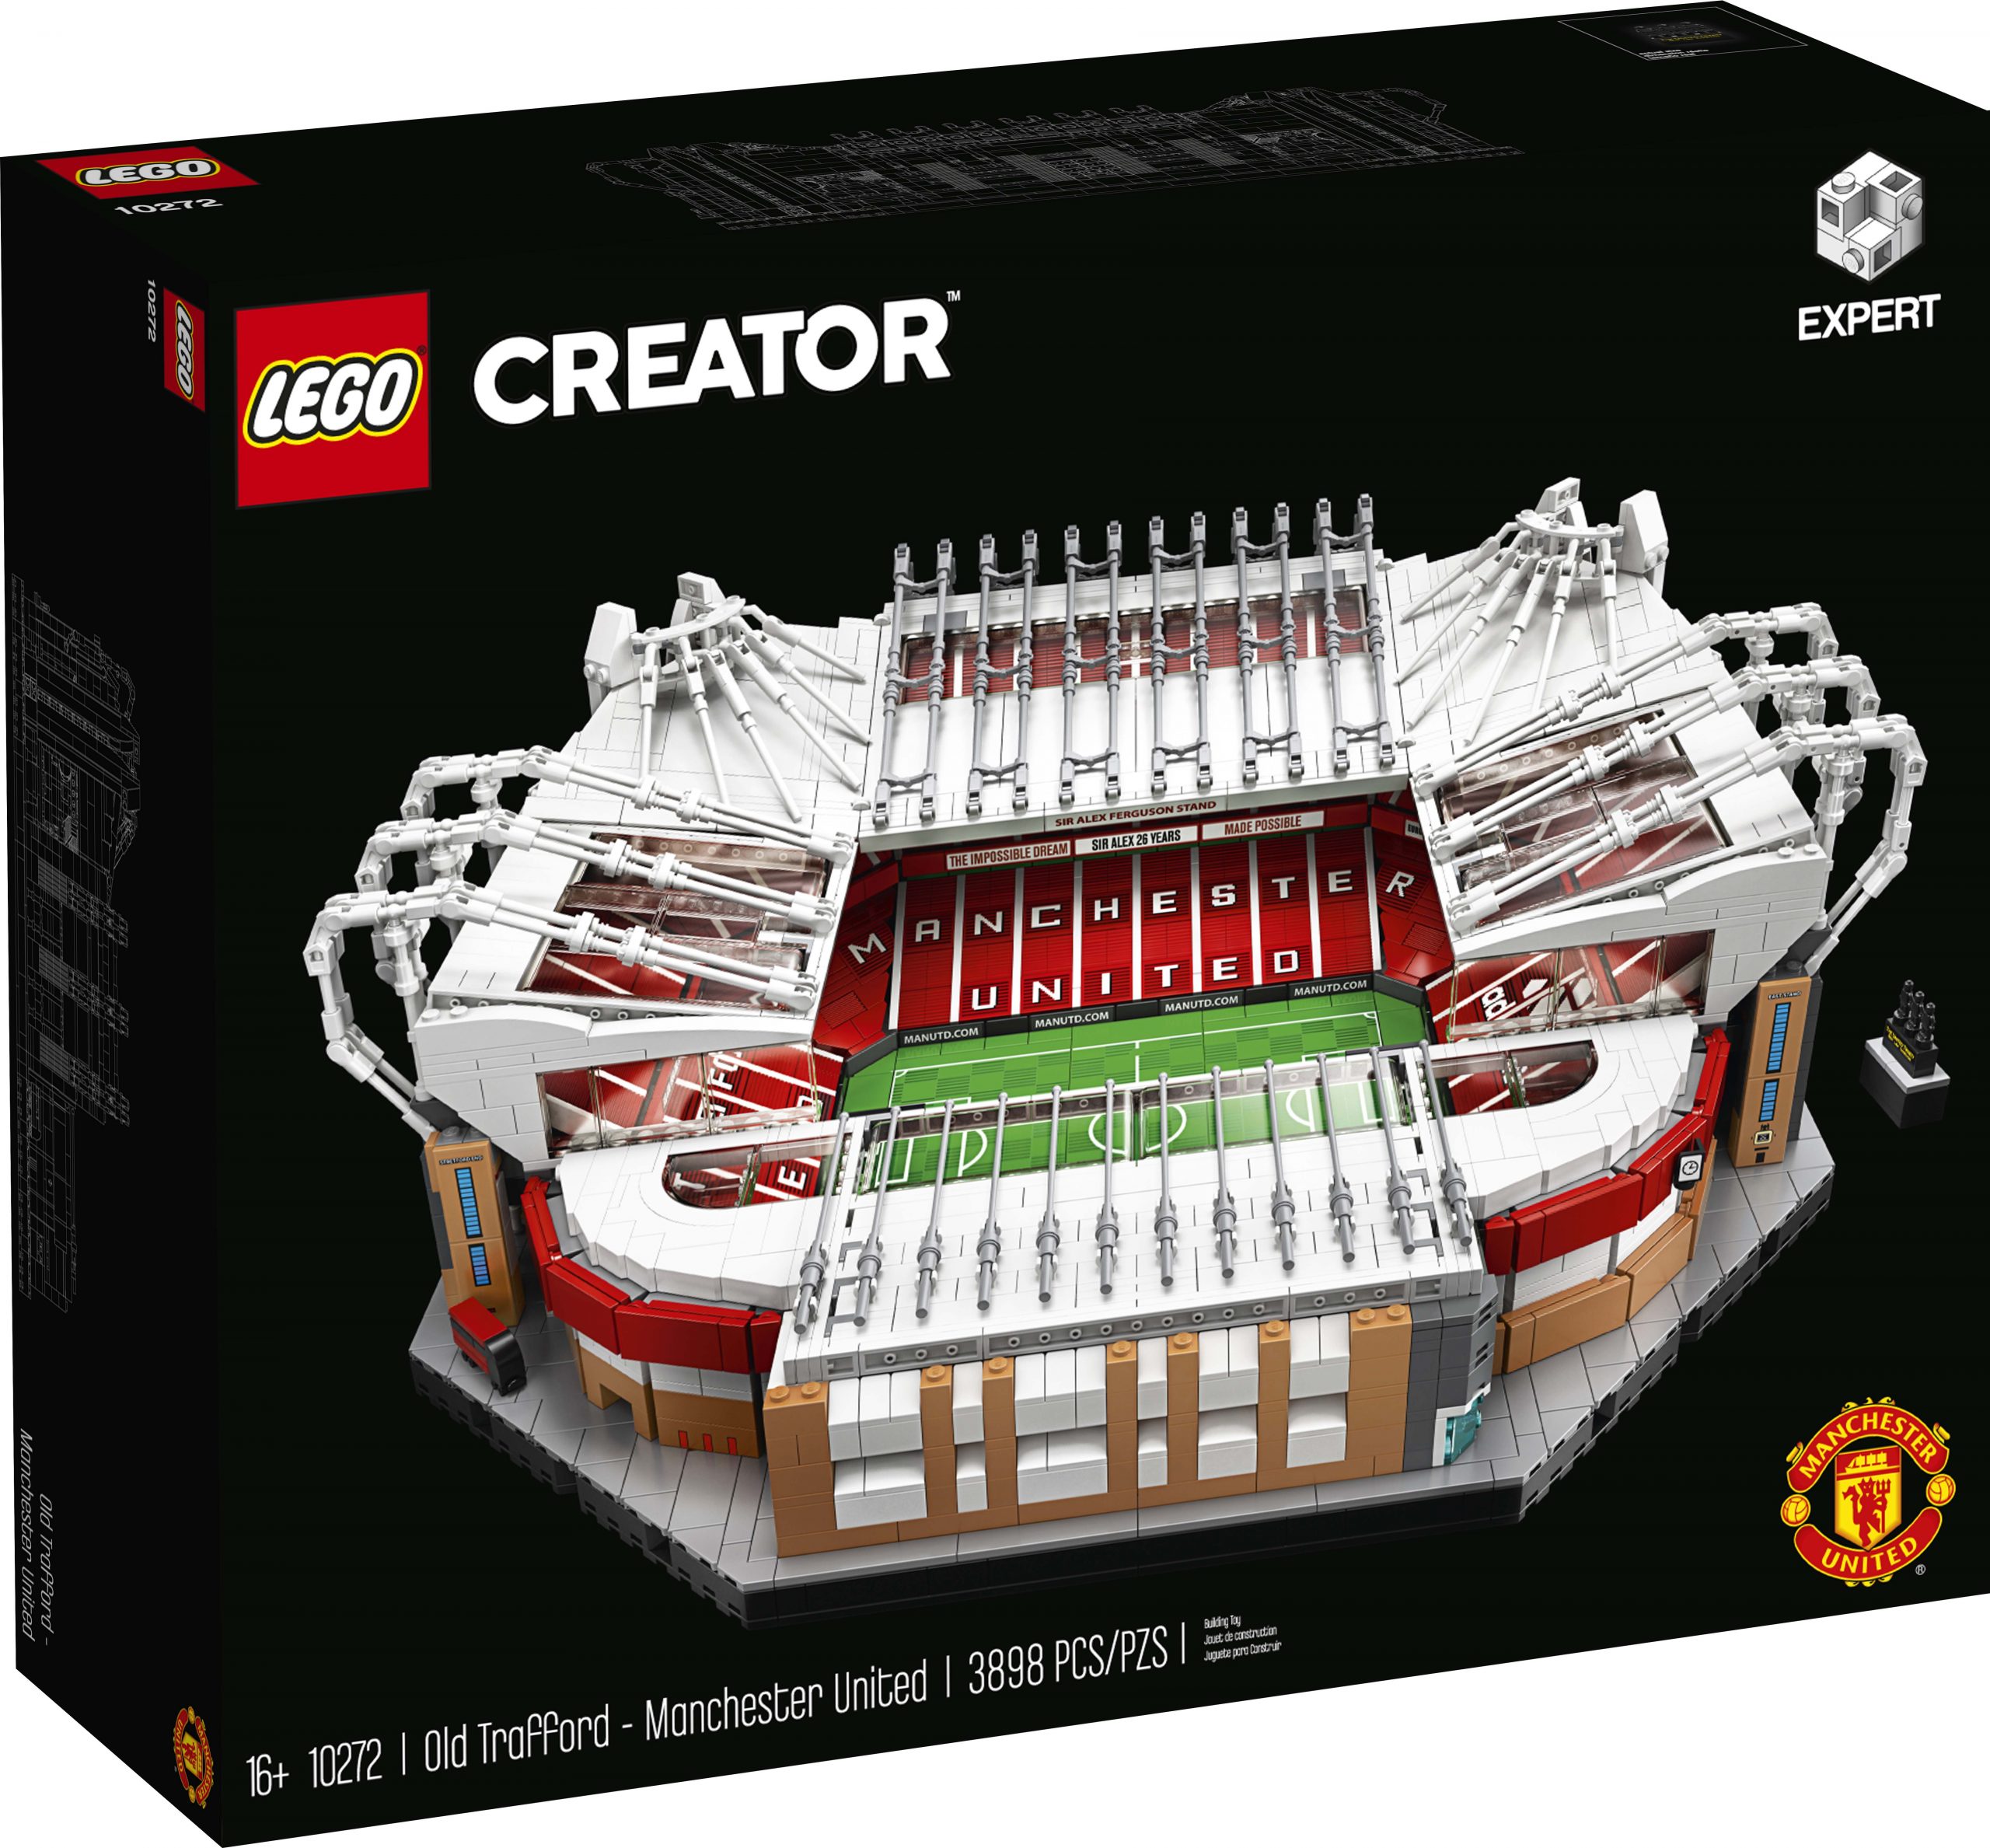 LEGO Creator Old Trafford - Manchester United (10272) Officially Announced  - The Brick Fan